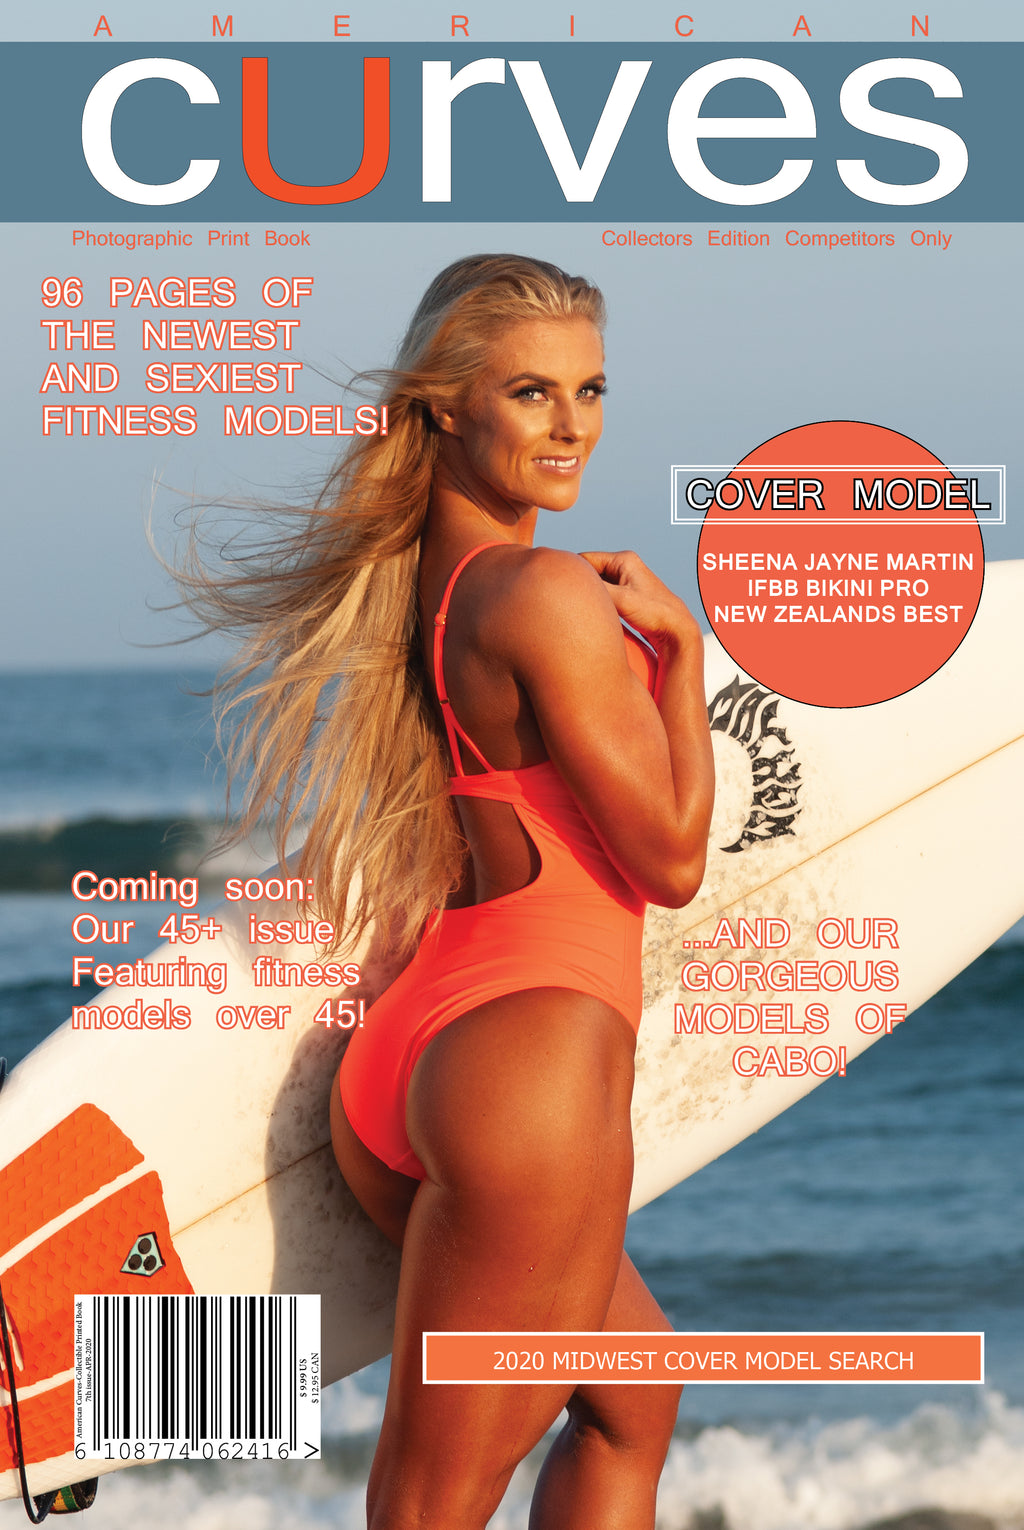 American Curves Magazine-7th Issue 2020-Collectors edition [Paper-back]